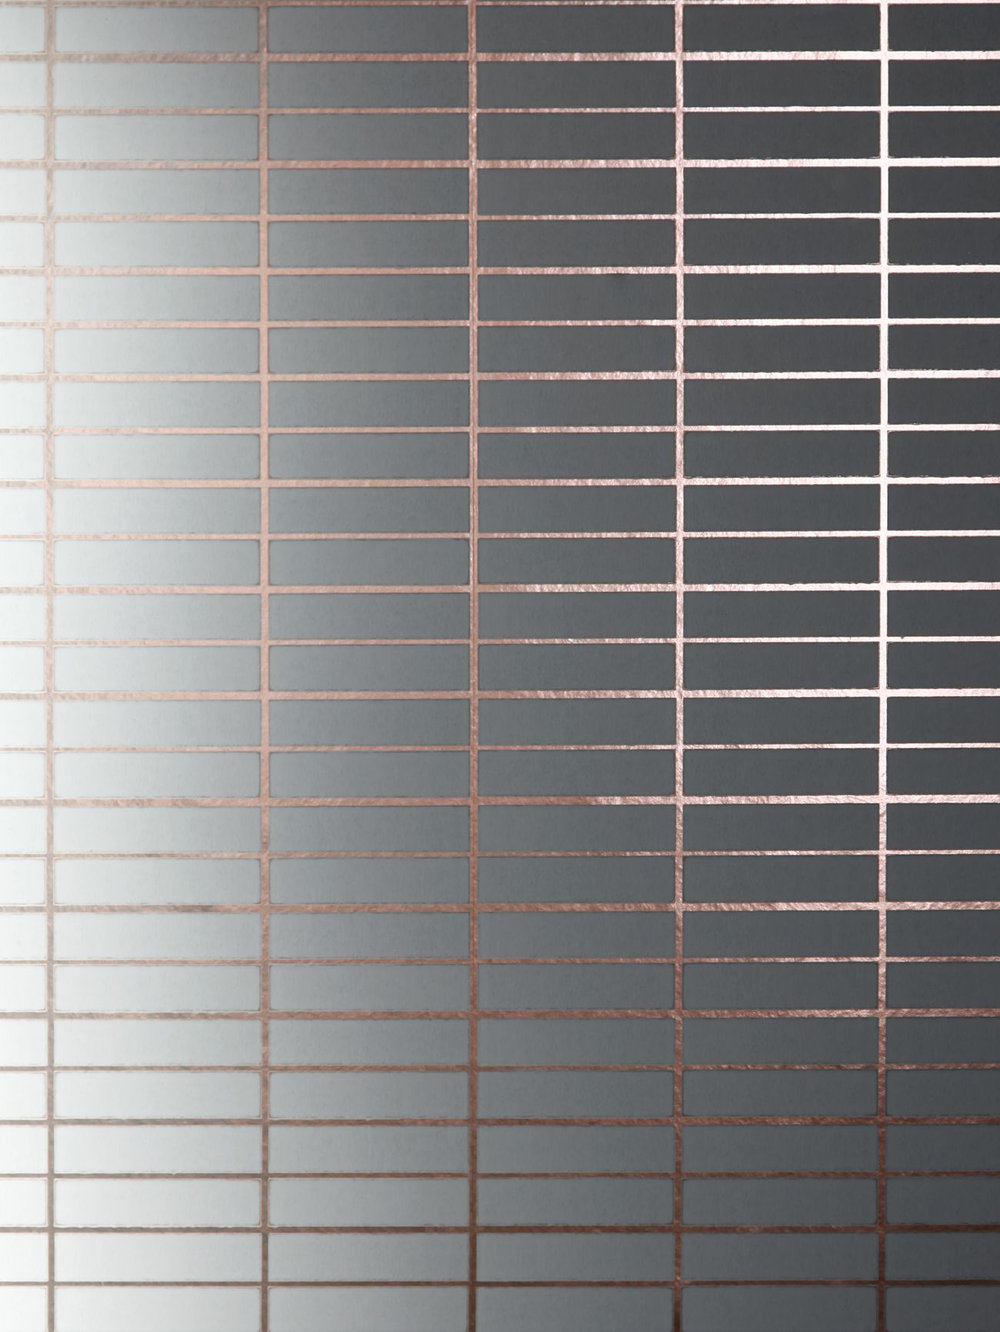 Grid  Wallpaper - Copper Rose / White - by Erica Wakerly